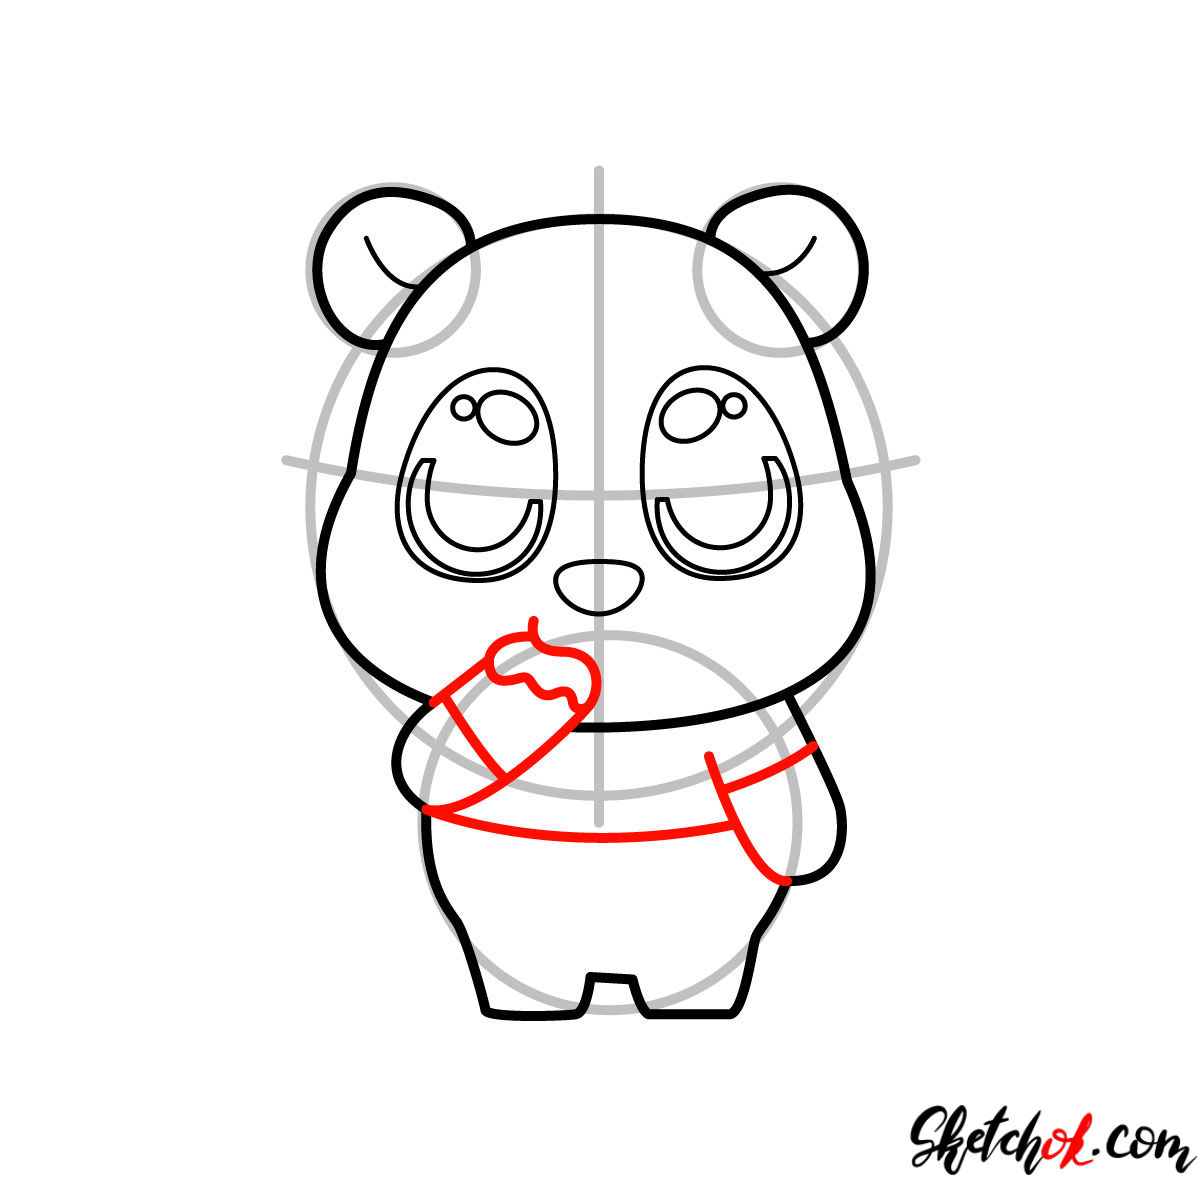 How to draw Pooh Bear chibi - step 06